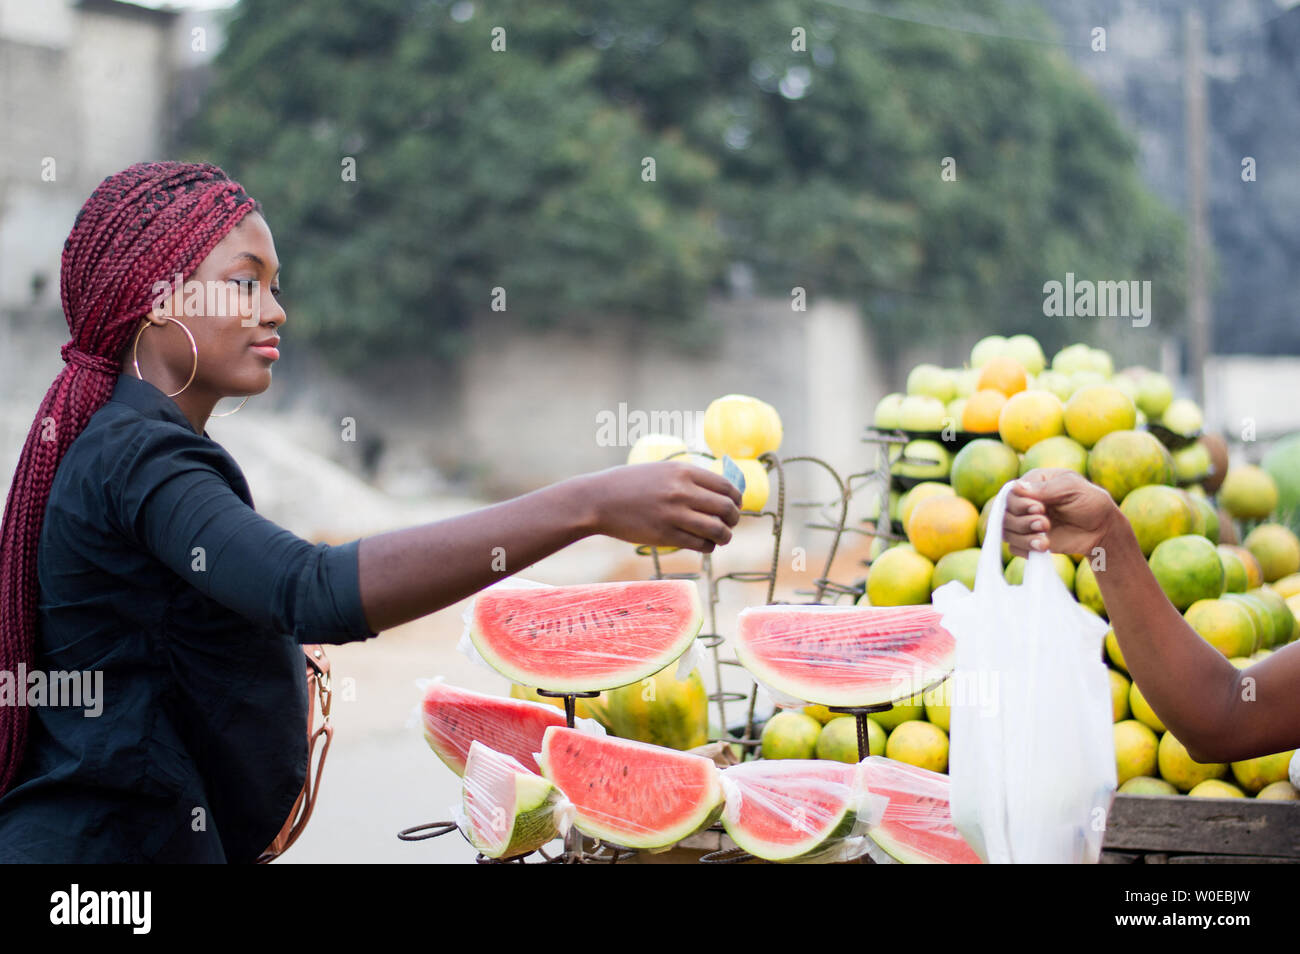 young woman gives a banknote to the vendor at street fruit market. Stock Photo